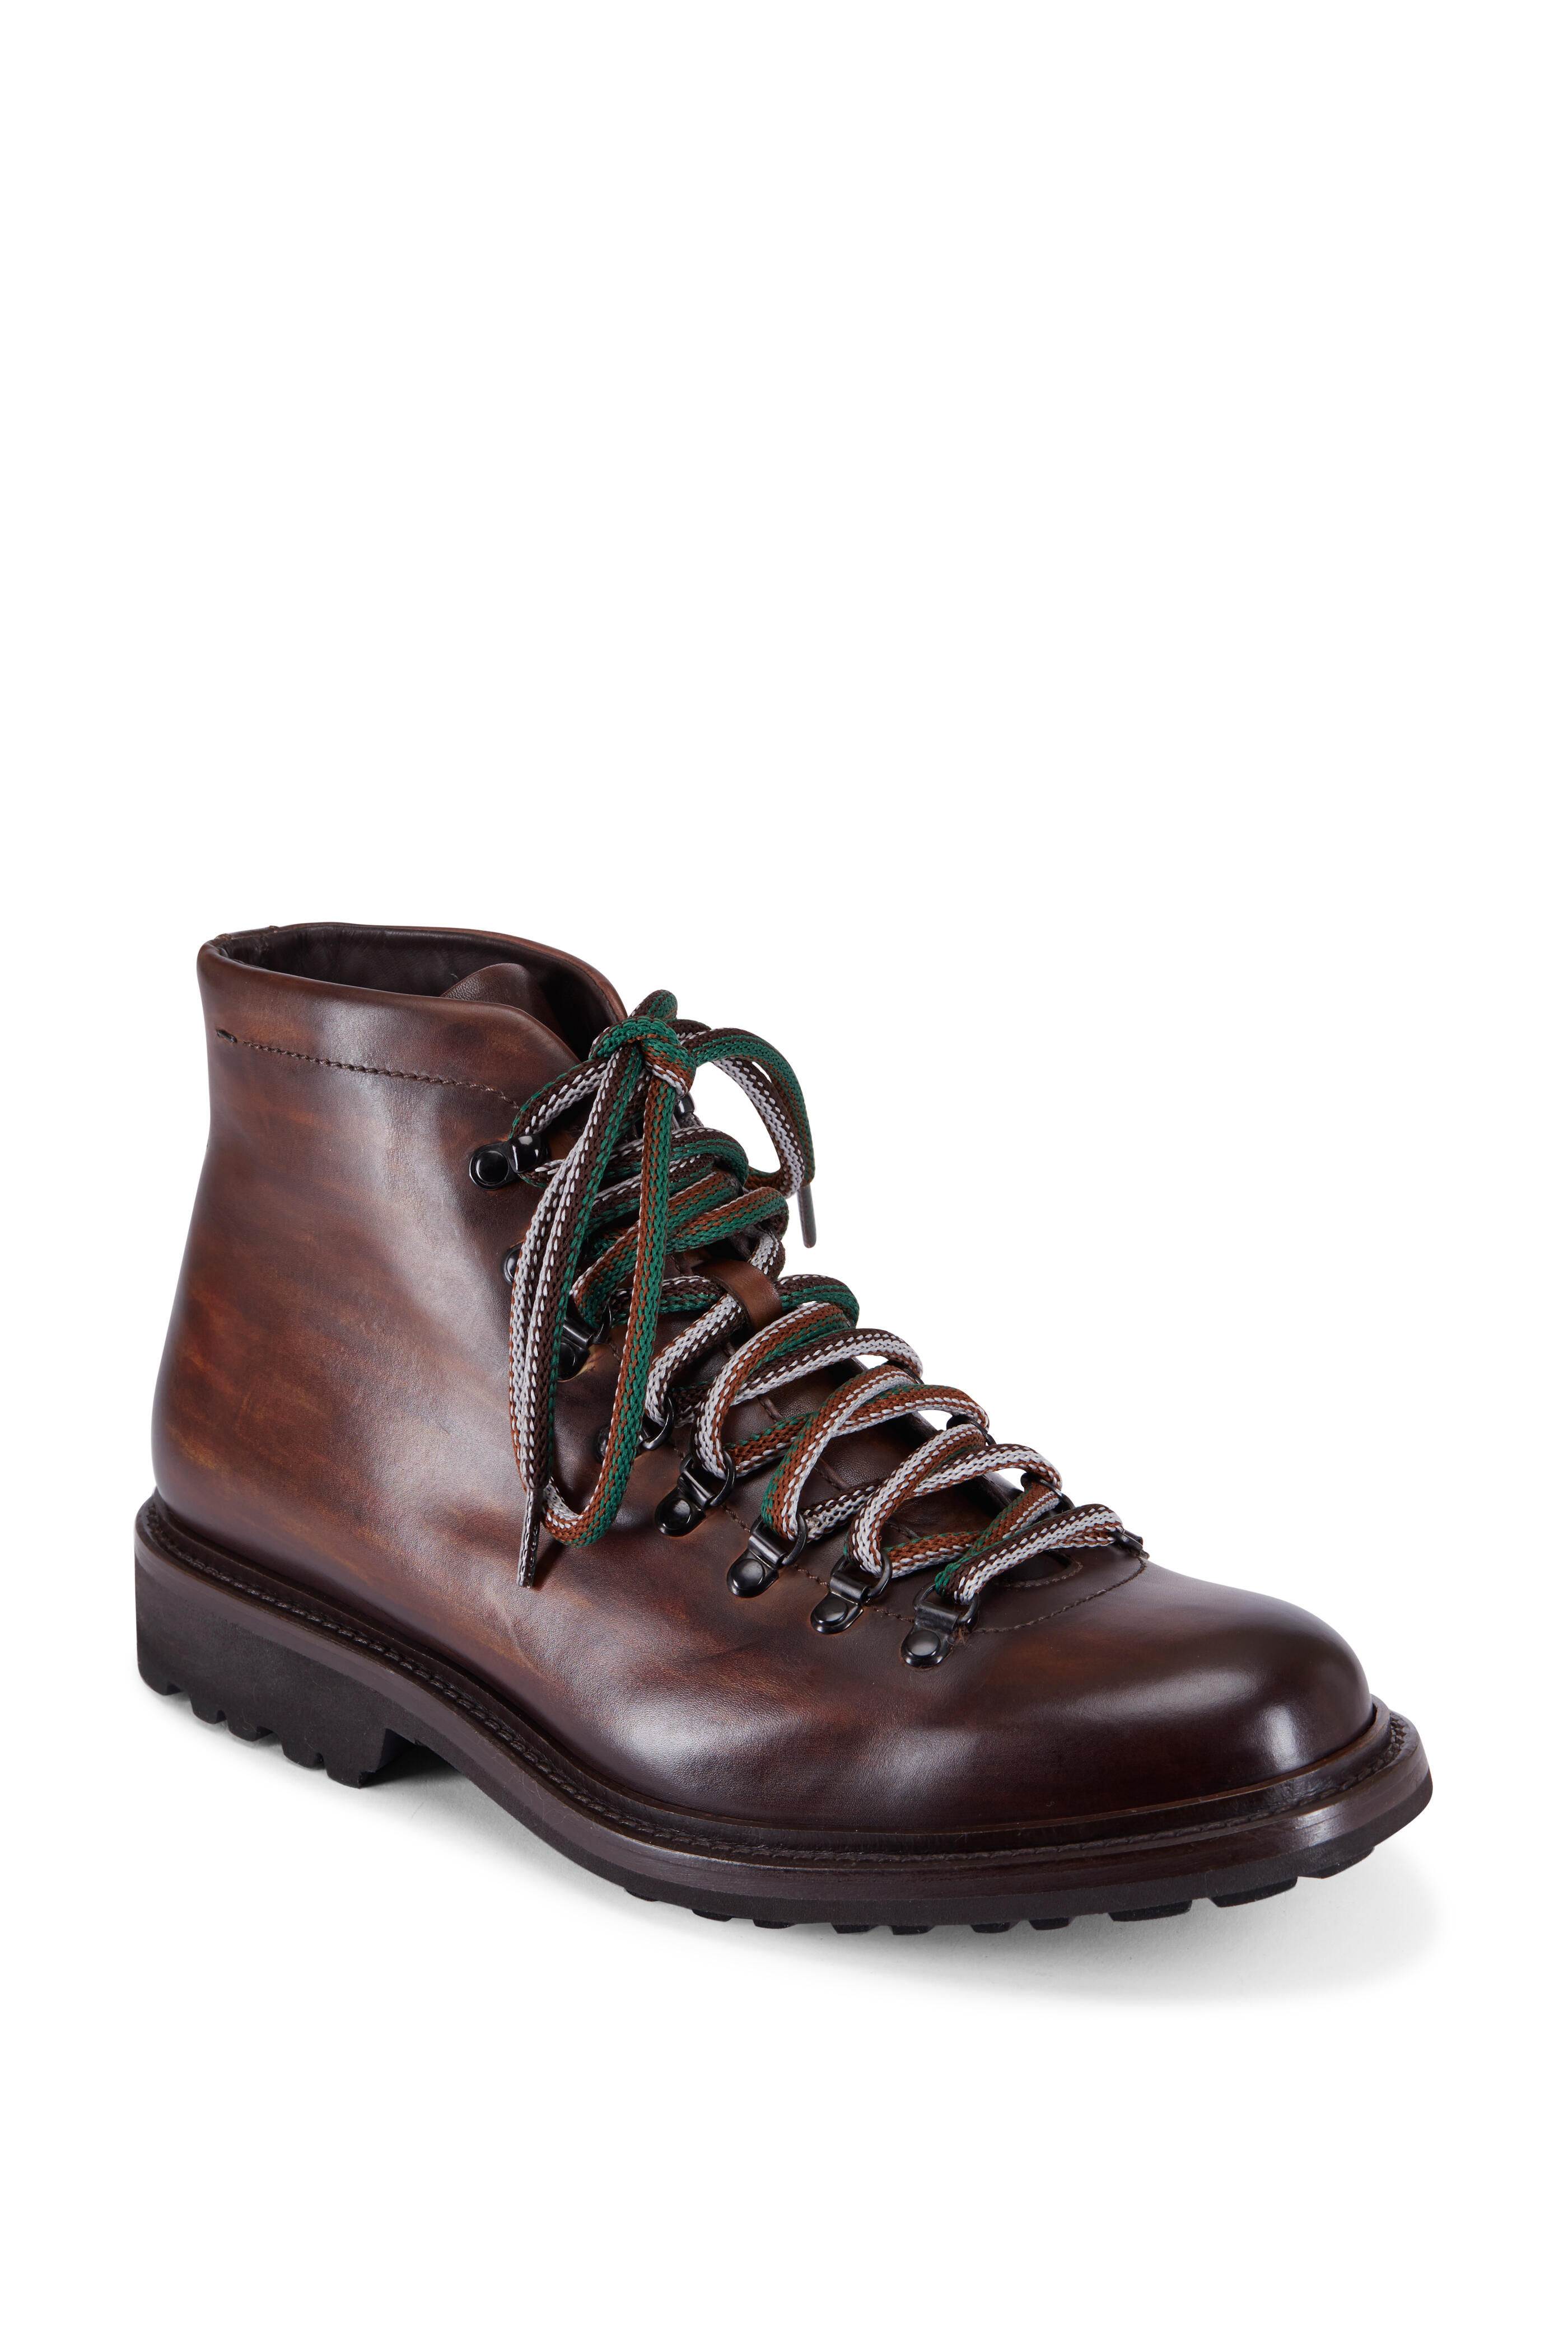 Tabaco Charm: Exploring Magnanni Tabaco Boots